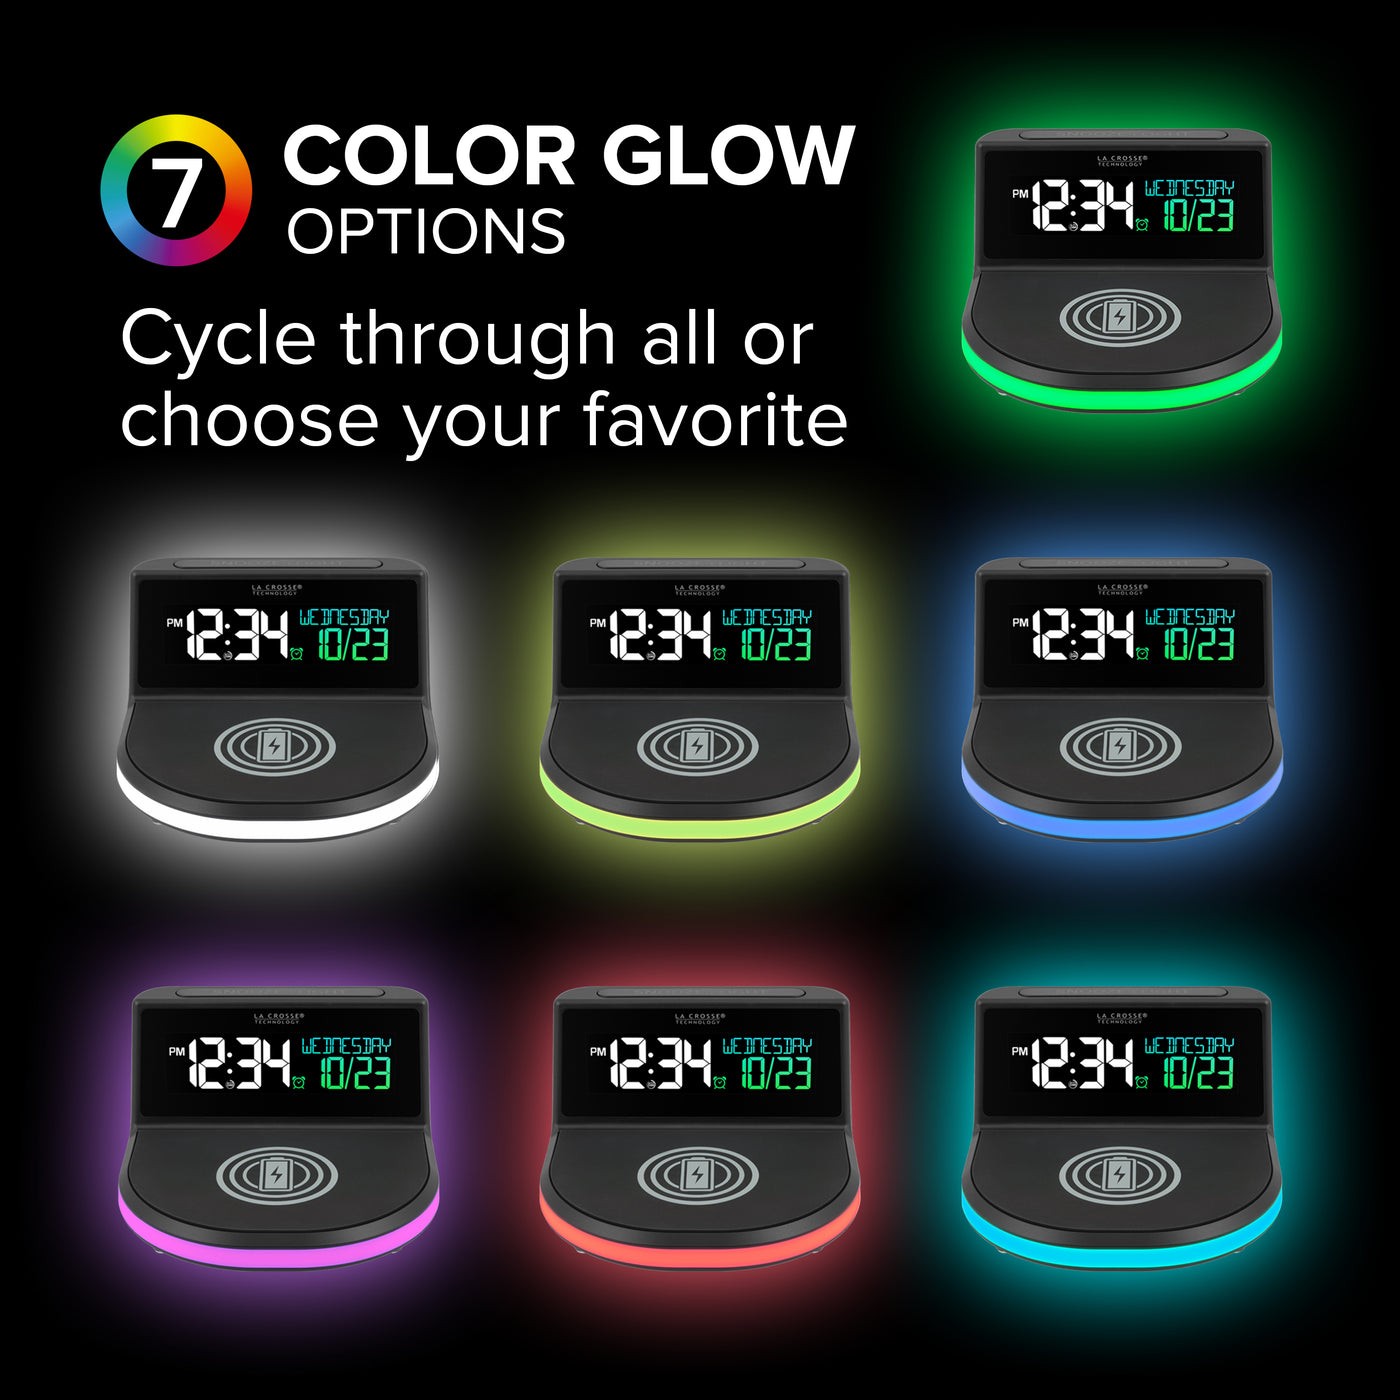 617-148 color glow options